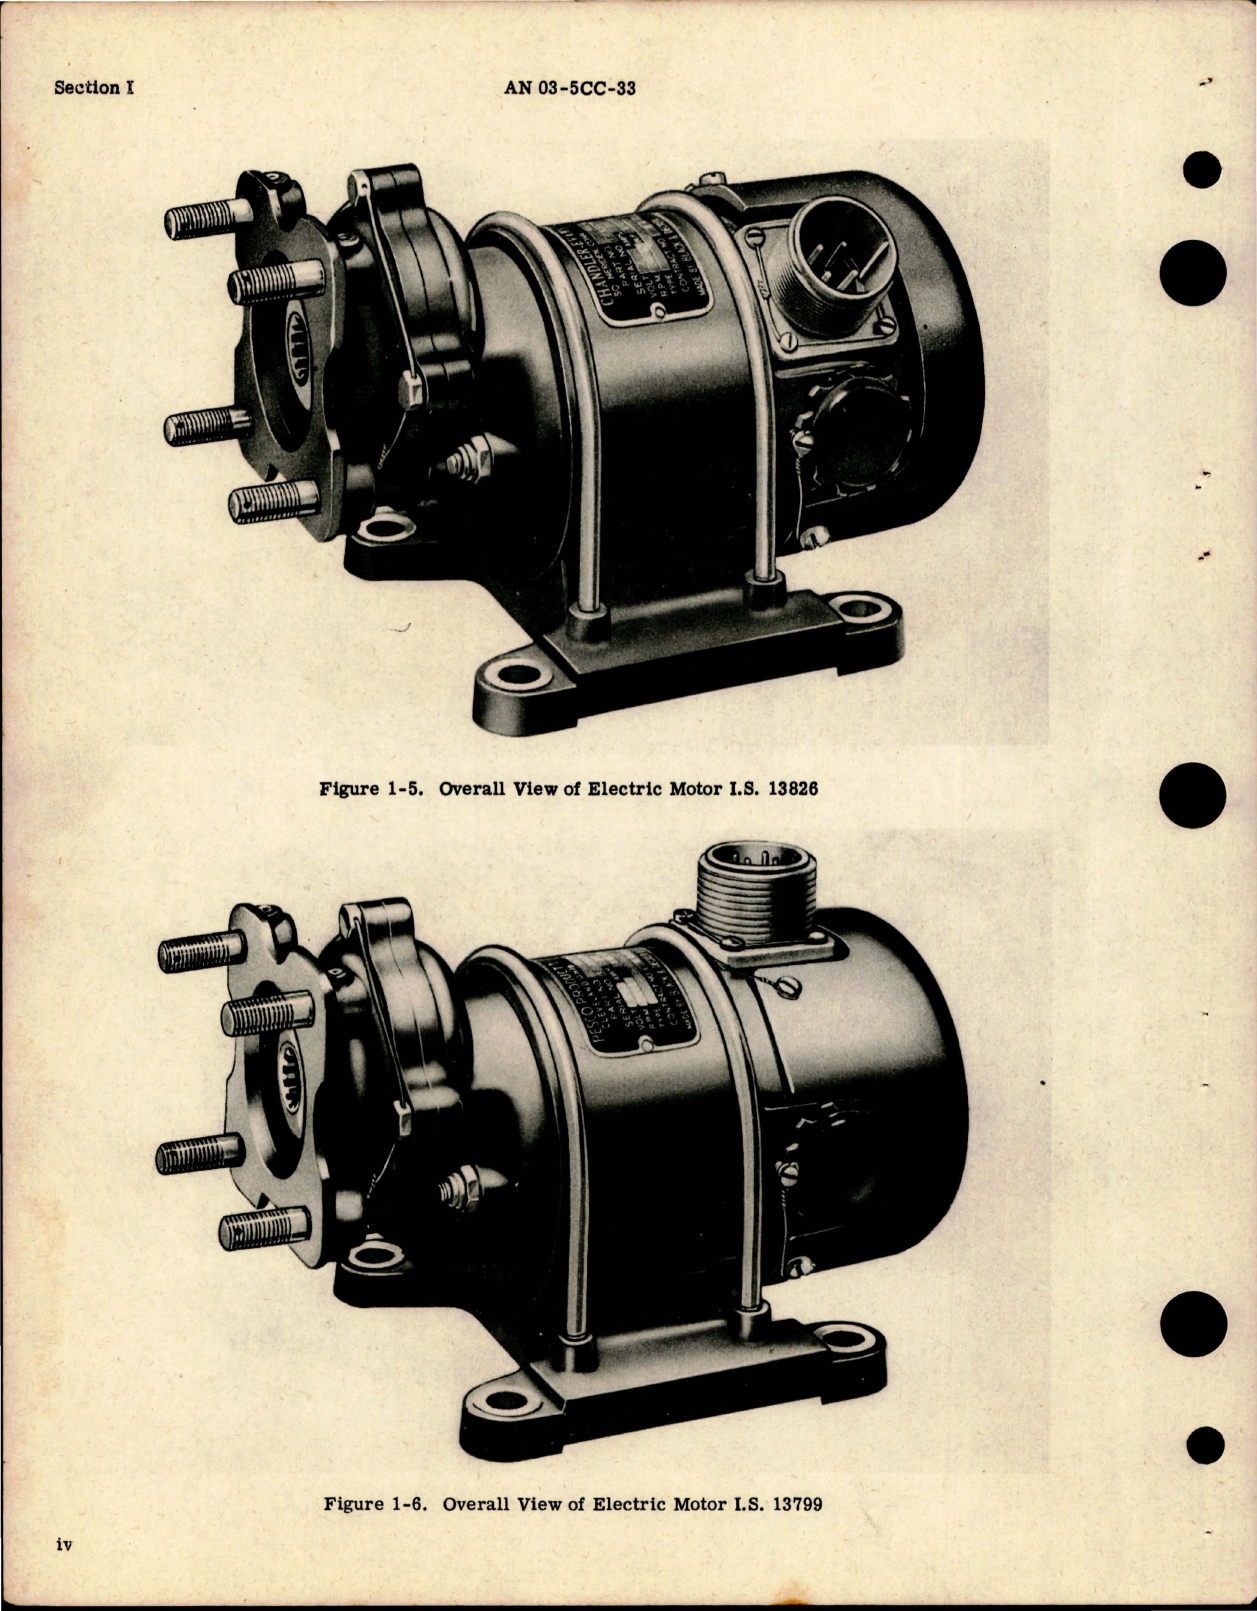 Sample page 8 from AirCorps Library document: Operation, Service, and Overhaul with Parts Catalog for Electric Motors 